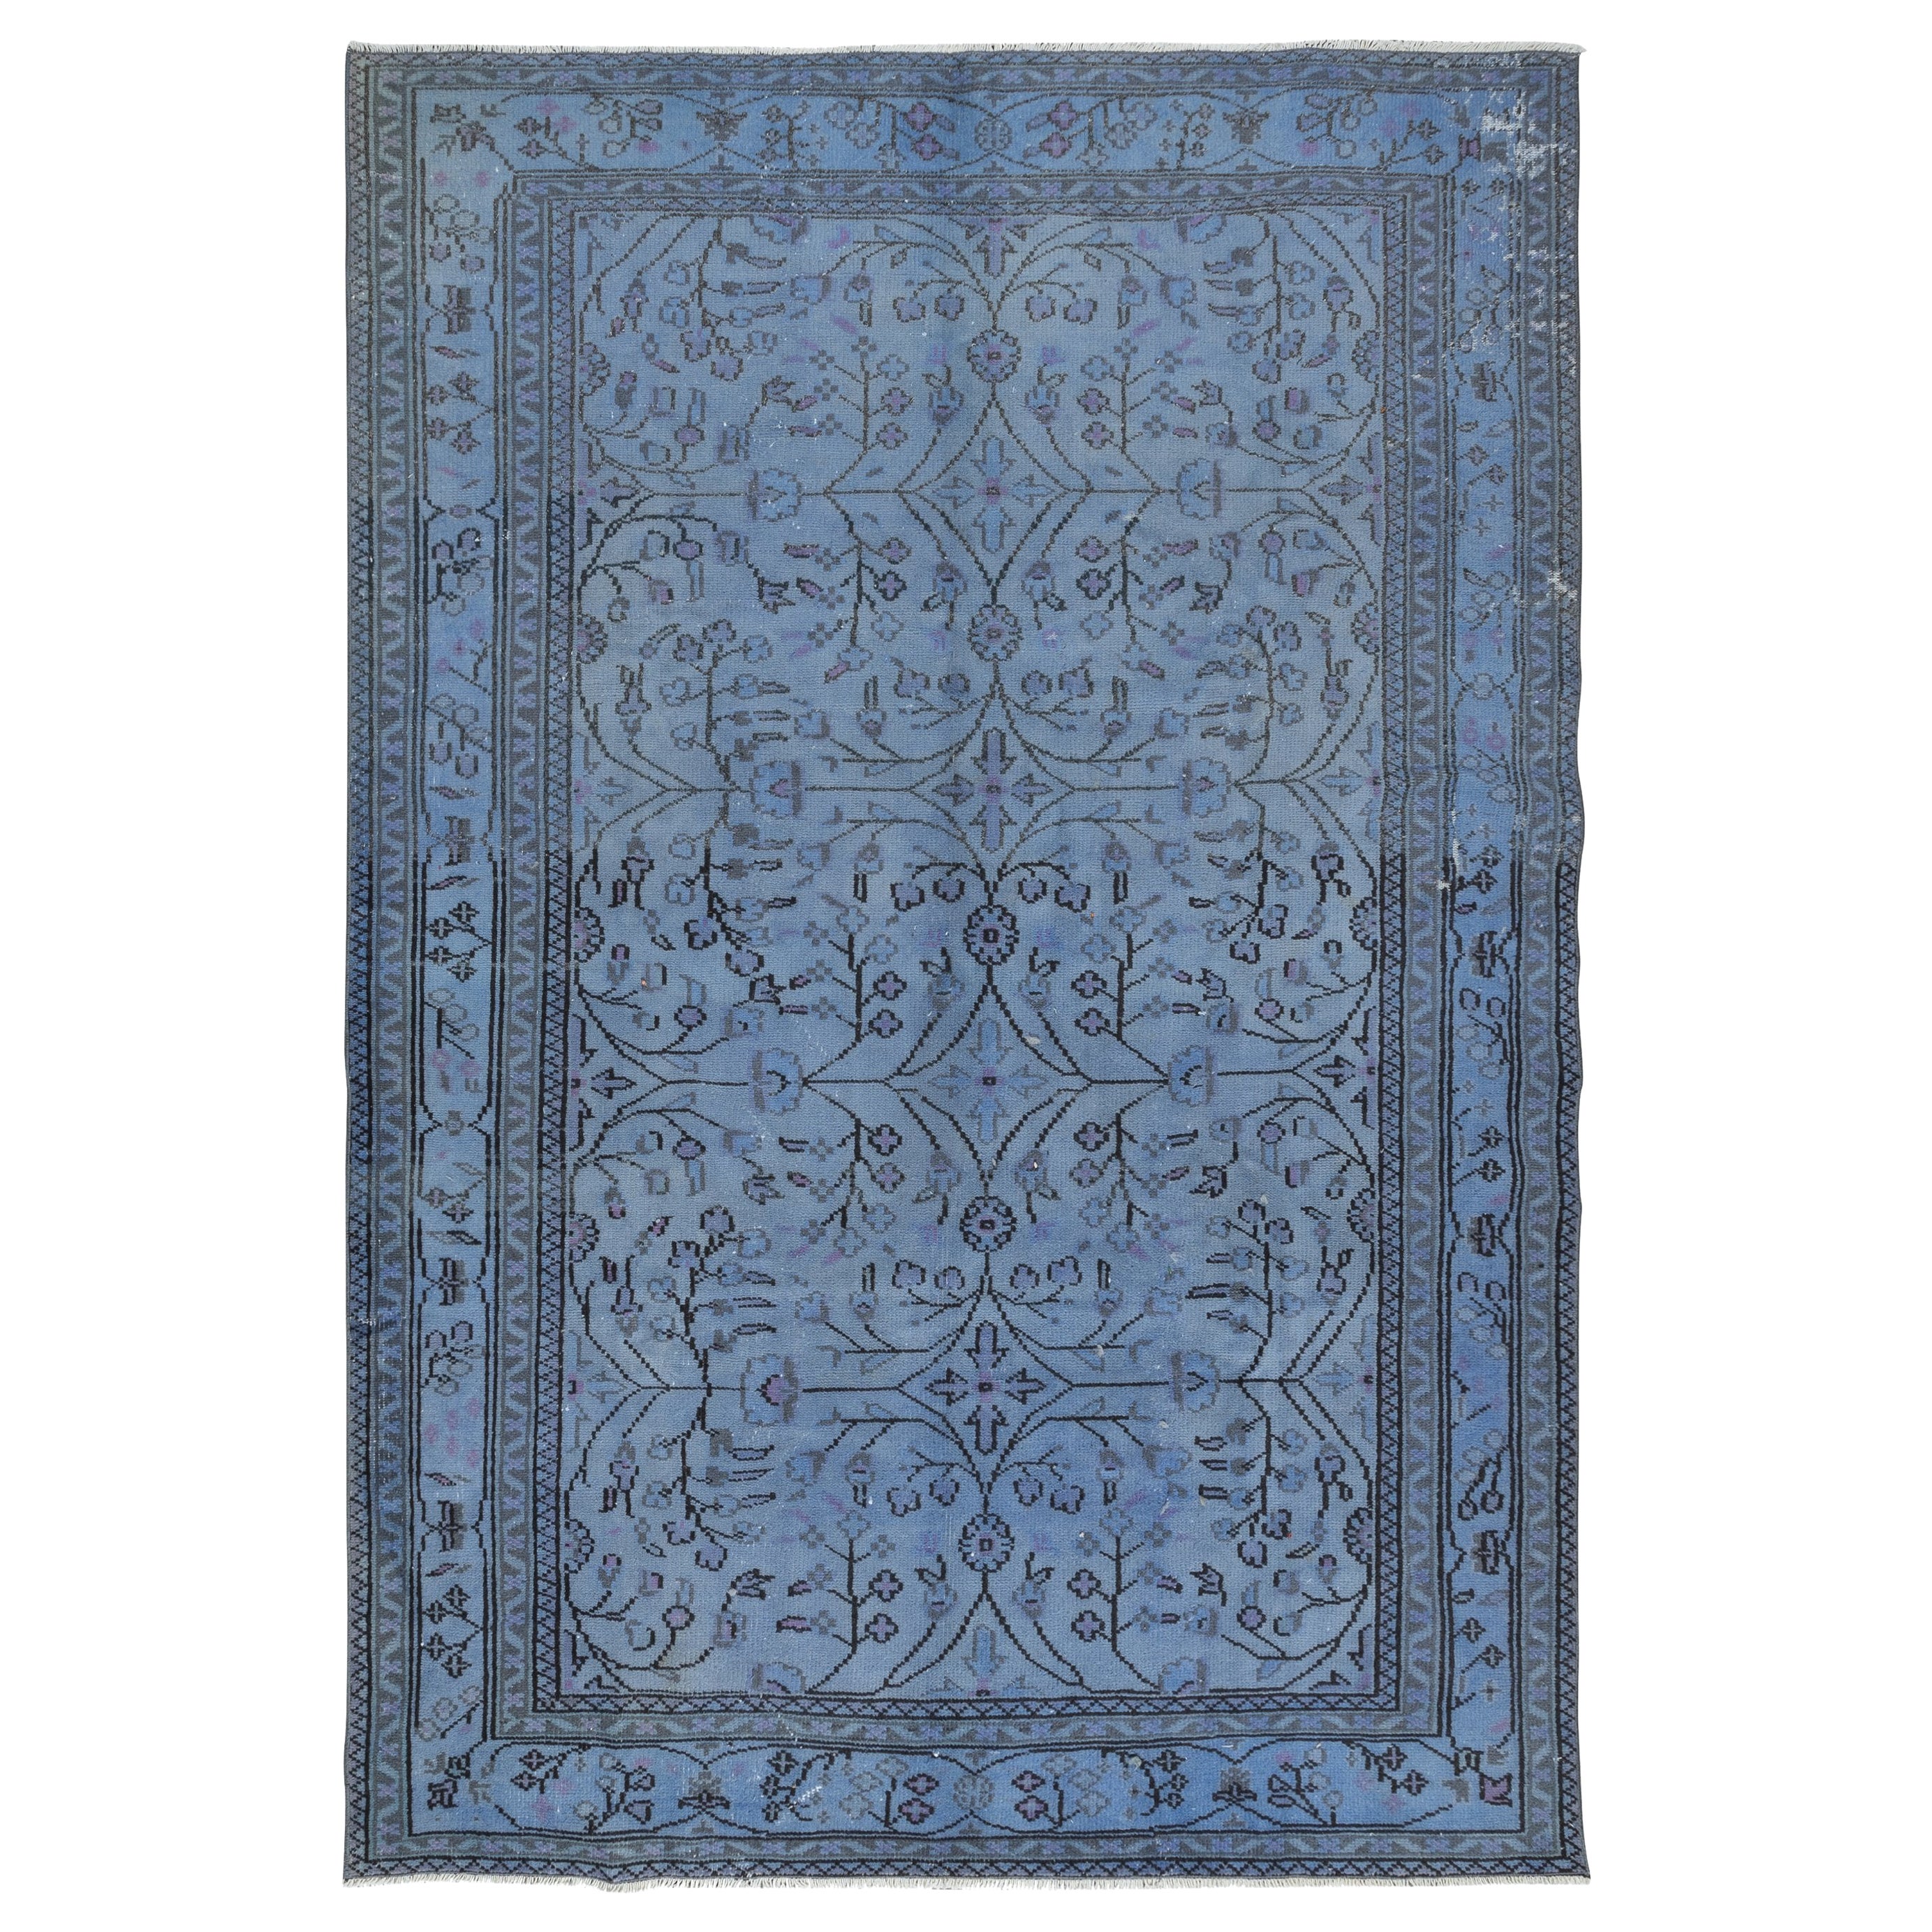 7x10 Ft Modern Handmade Rug Overdyed in Blue, One-of-a-kind Turkish Carpet